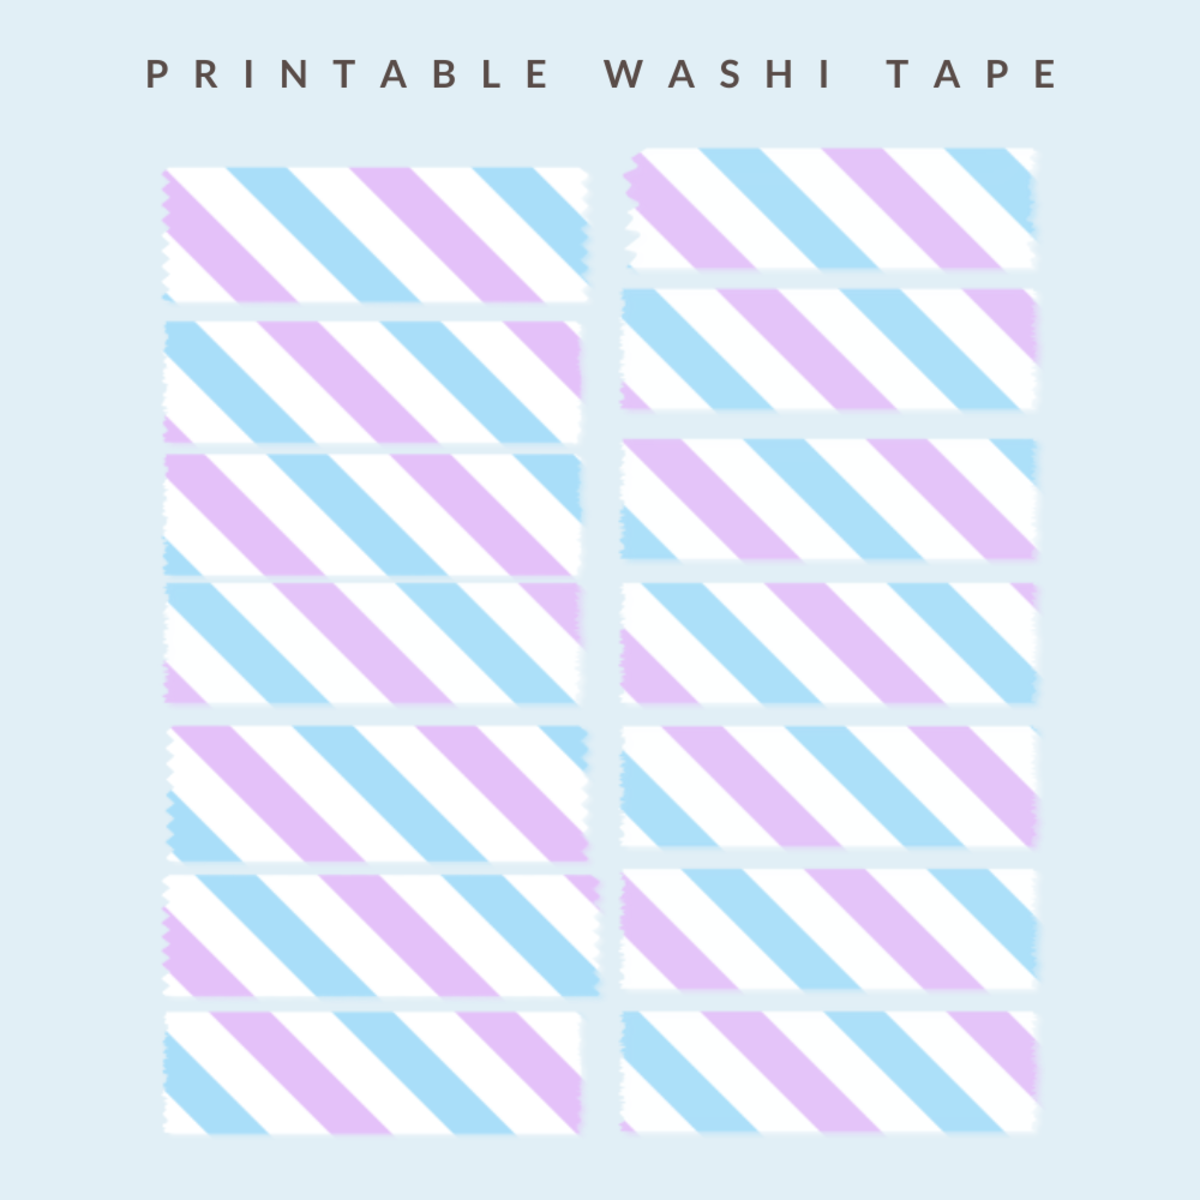 Printable Washi Tape PNG Image, Collection Of Aesthetic Washi Tape